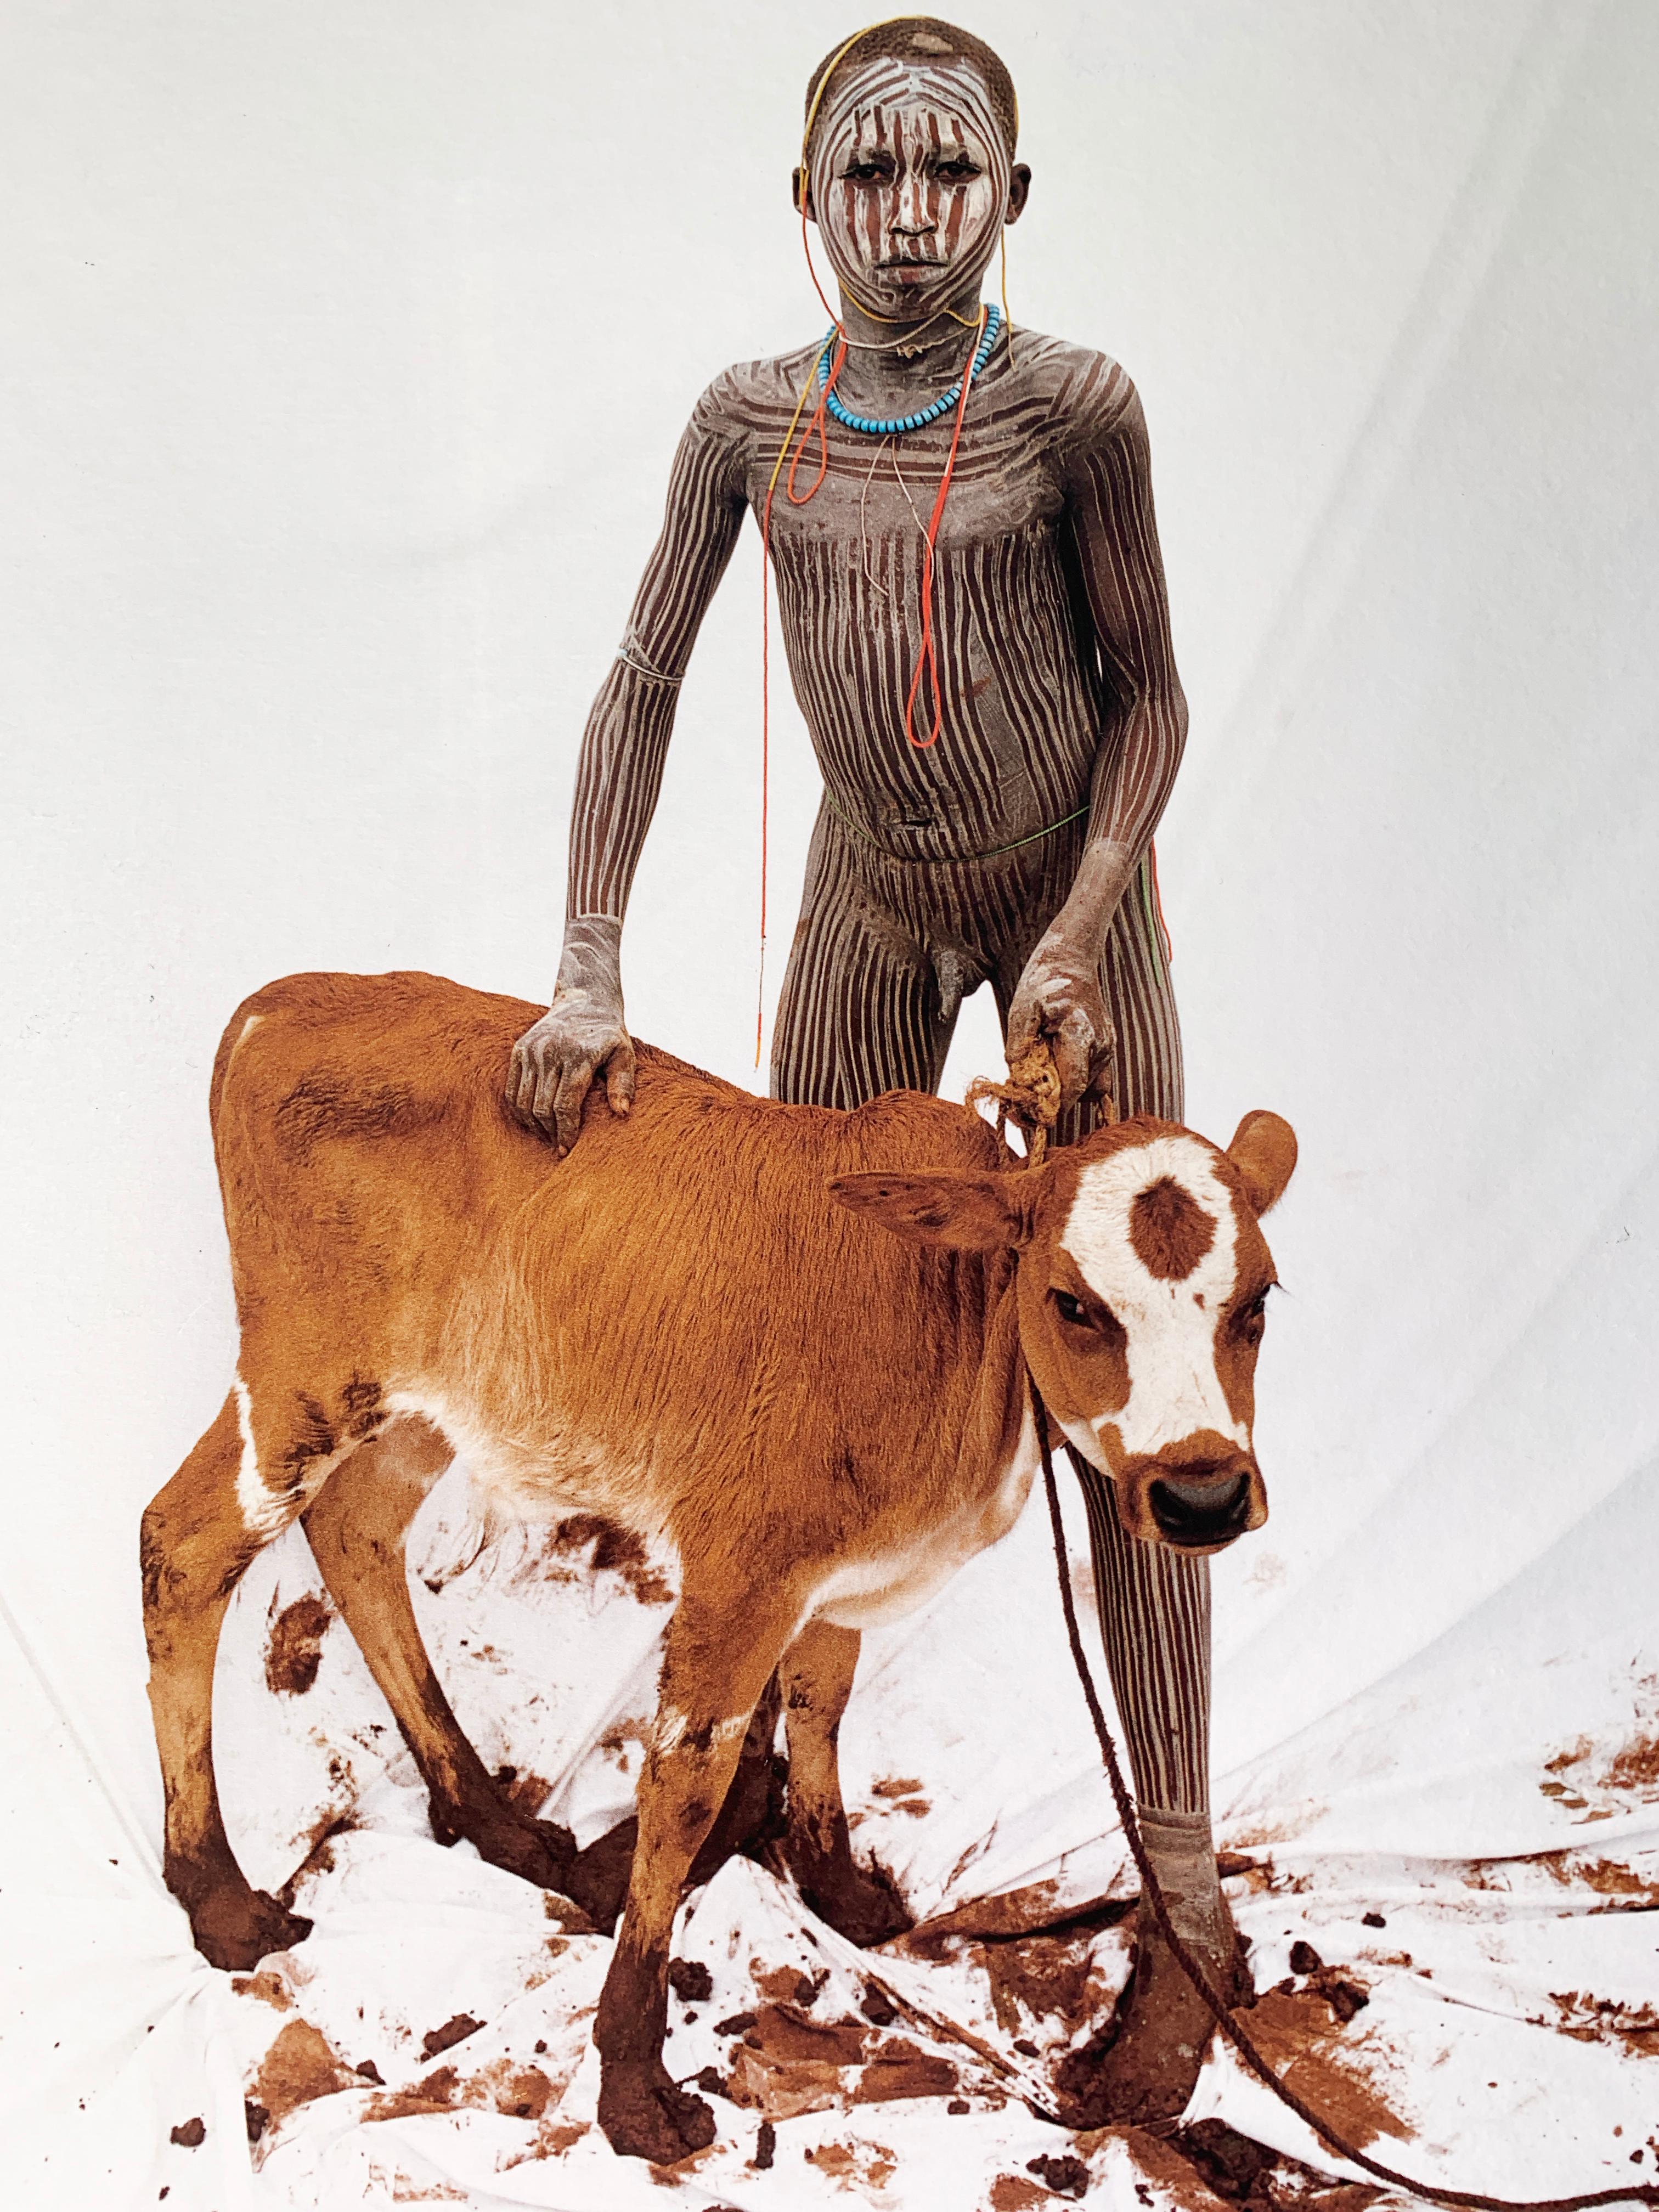 Boy with Calf, Tribal Child in Ethiopia, Africa, Japanese Paper Limited Edition - Photograph by Jean-Michel Voge